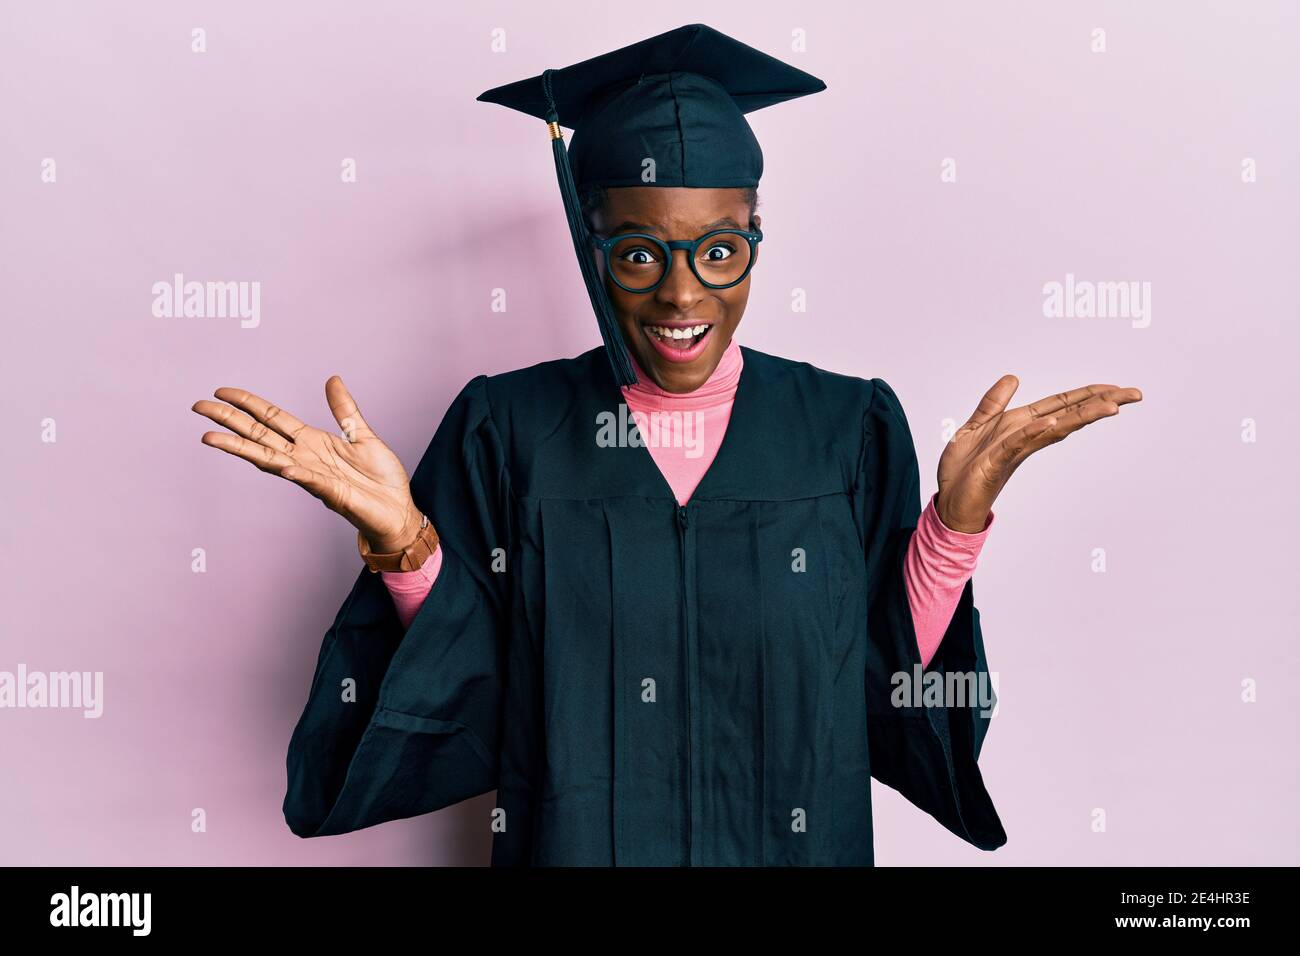 Young african american girl wearing graduation cap and ceremony robe celebrating crazy and amazed for success with arms raised and open eyes screaming Stock Photo